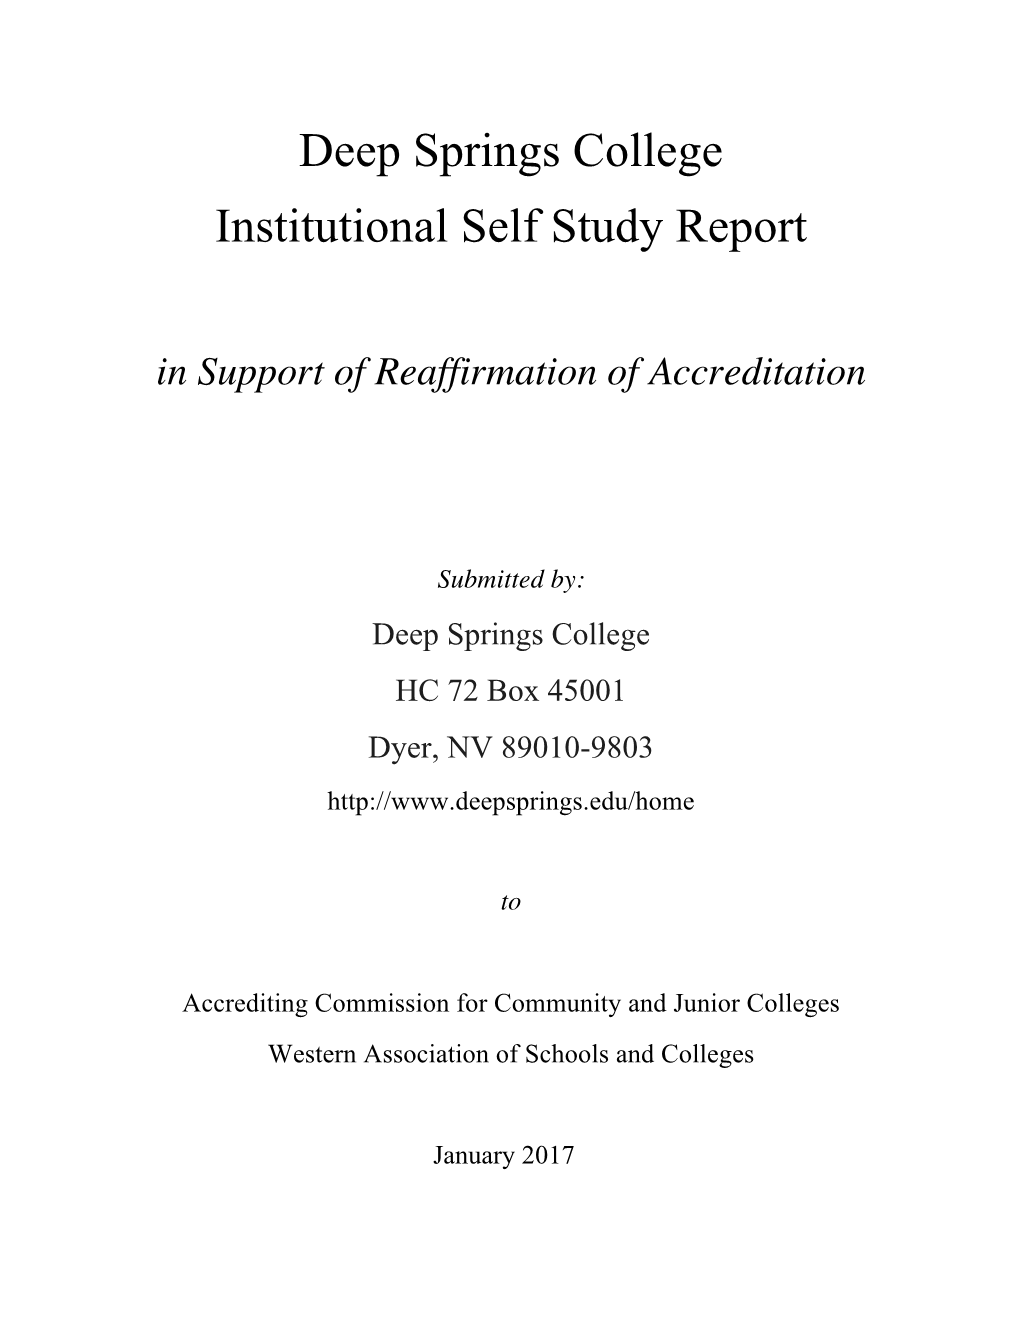 Deep Springs College Institutional Self Study Report in Support of Reaffirmation of Accreditation